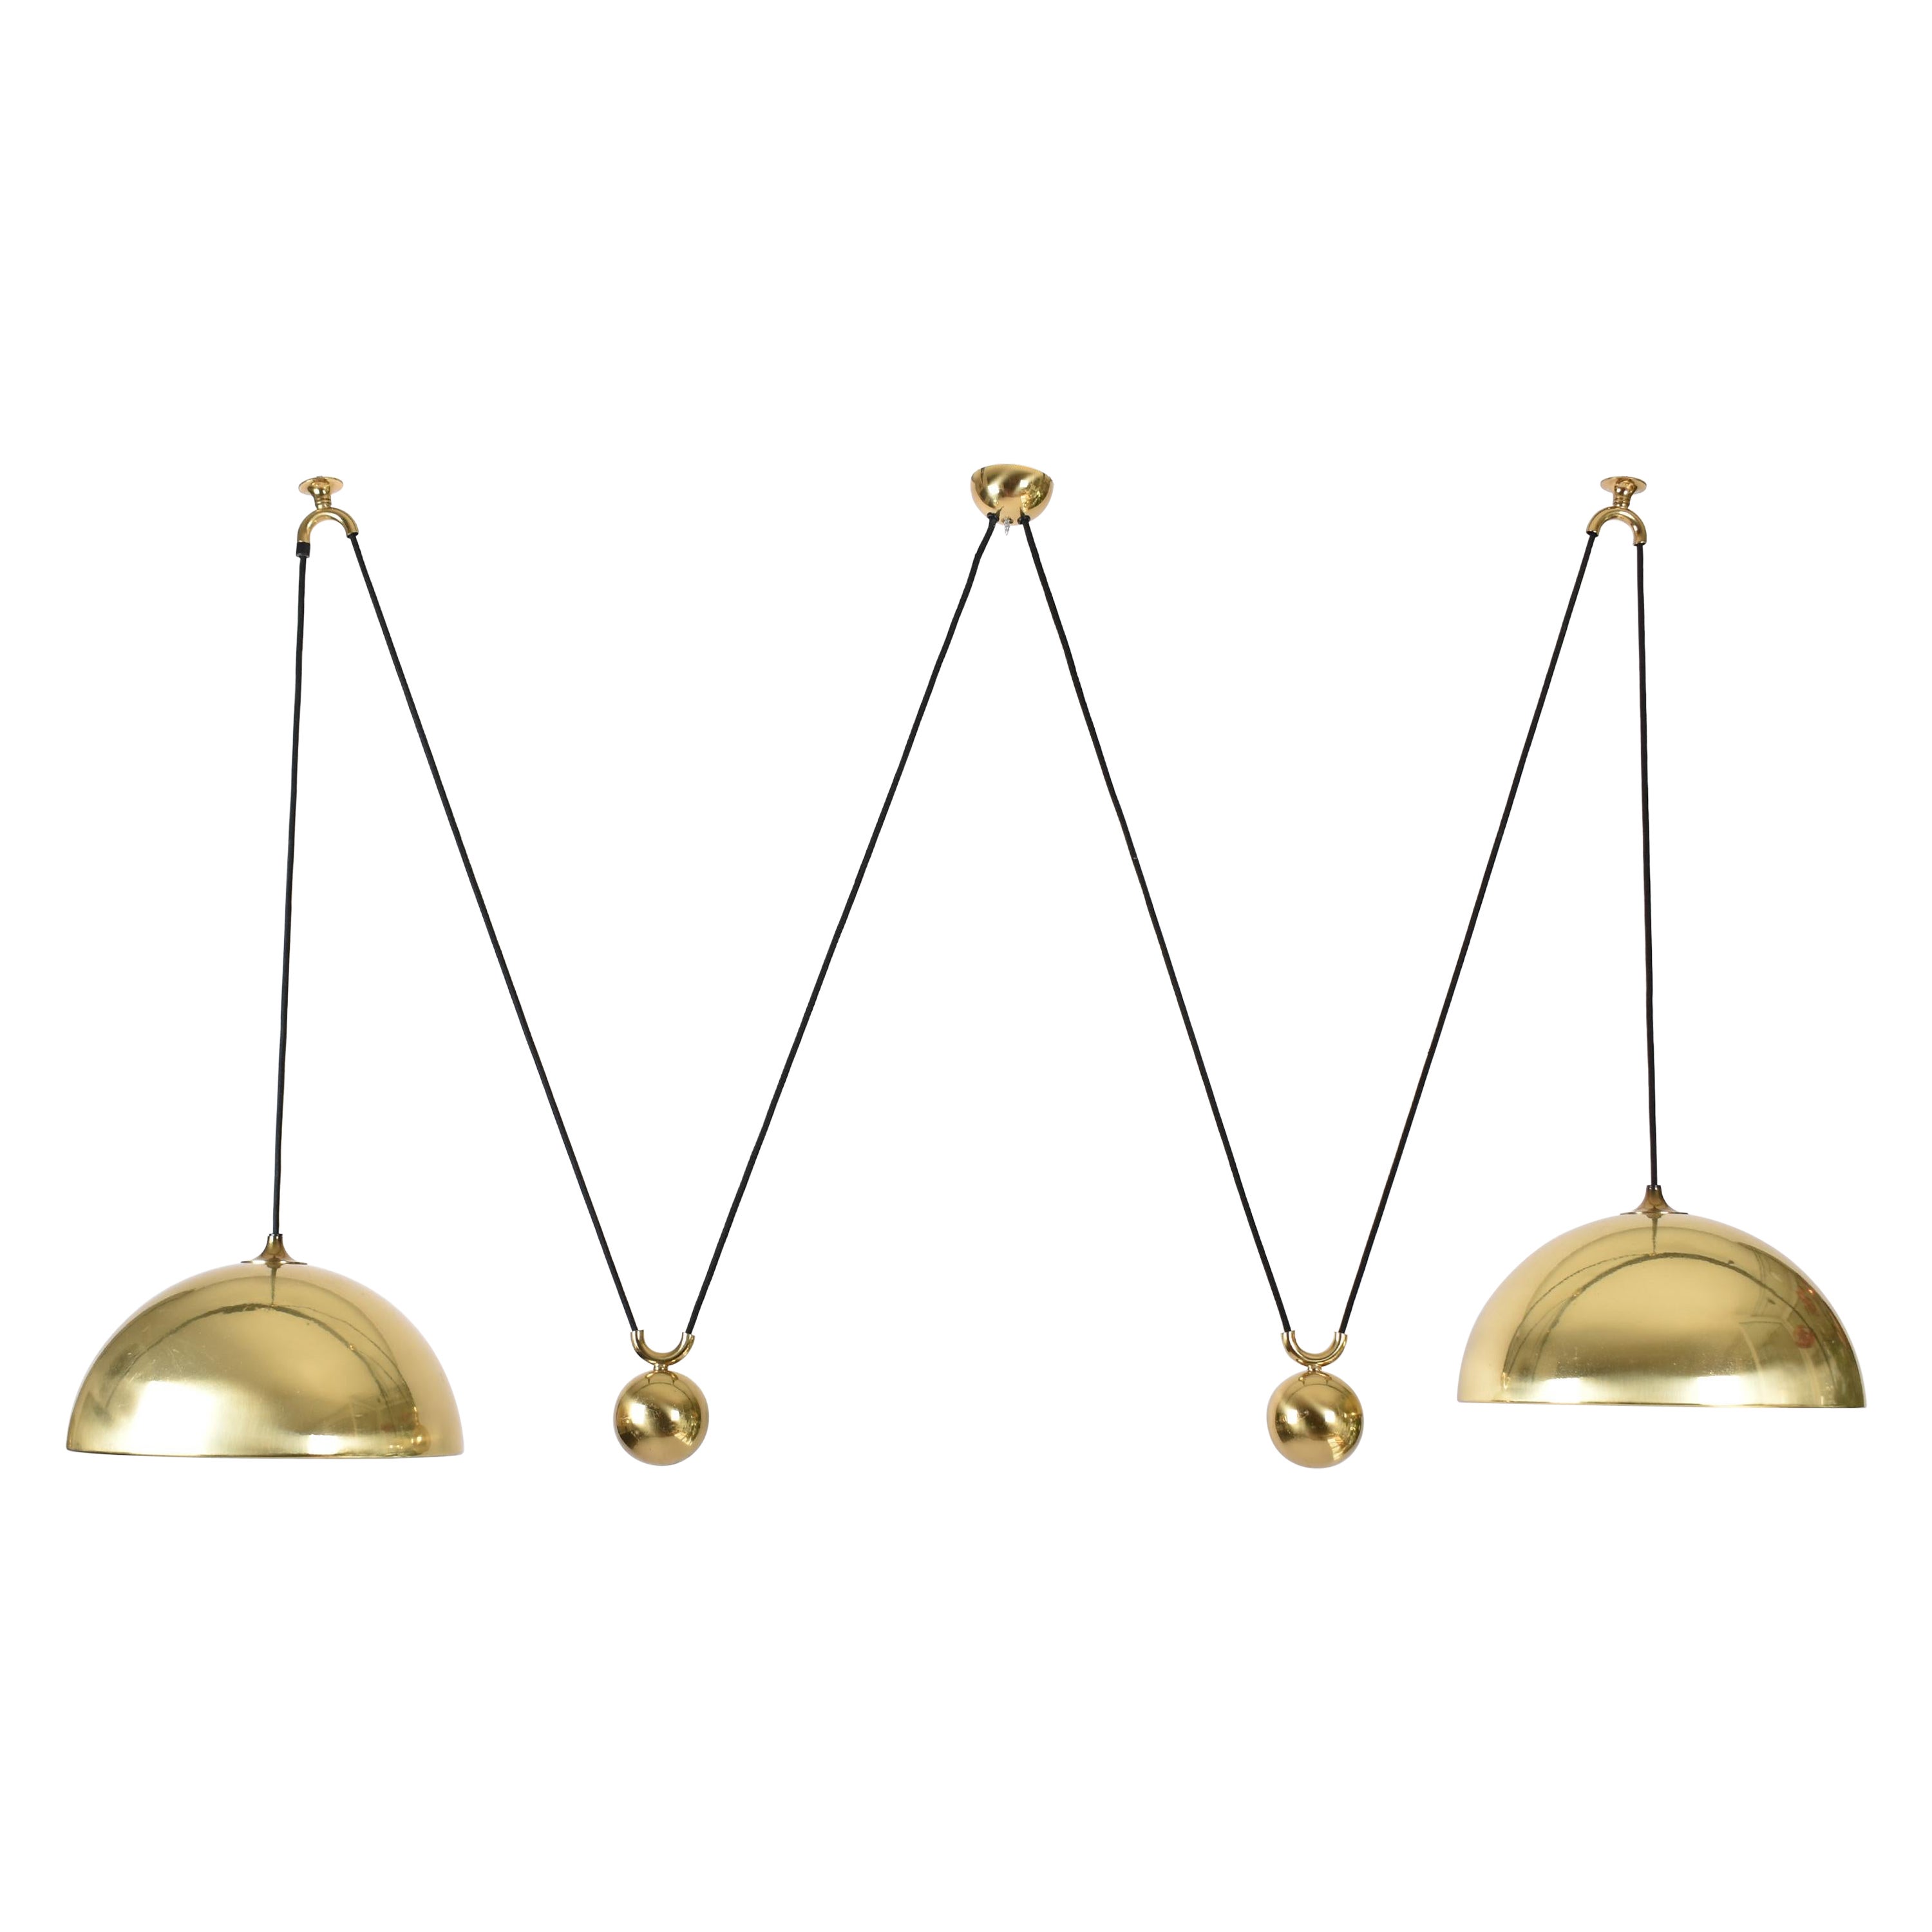 Florian Schulz Double Counterbalance Brass Lamp, Germany, 1970